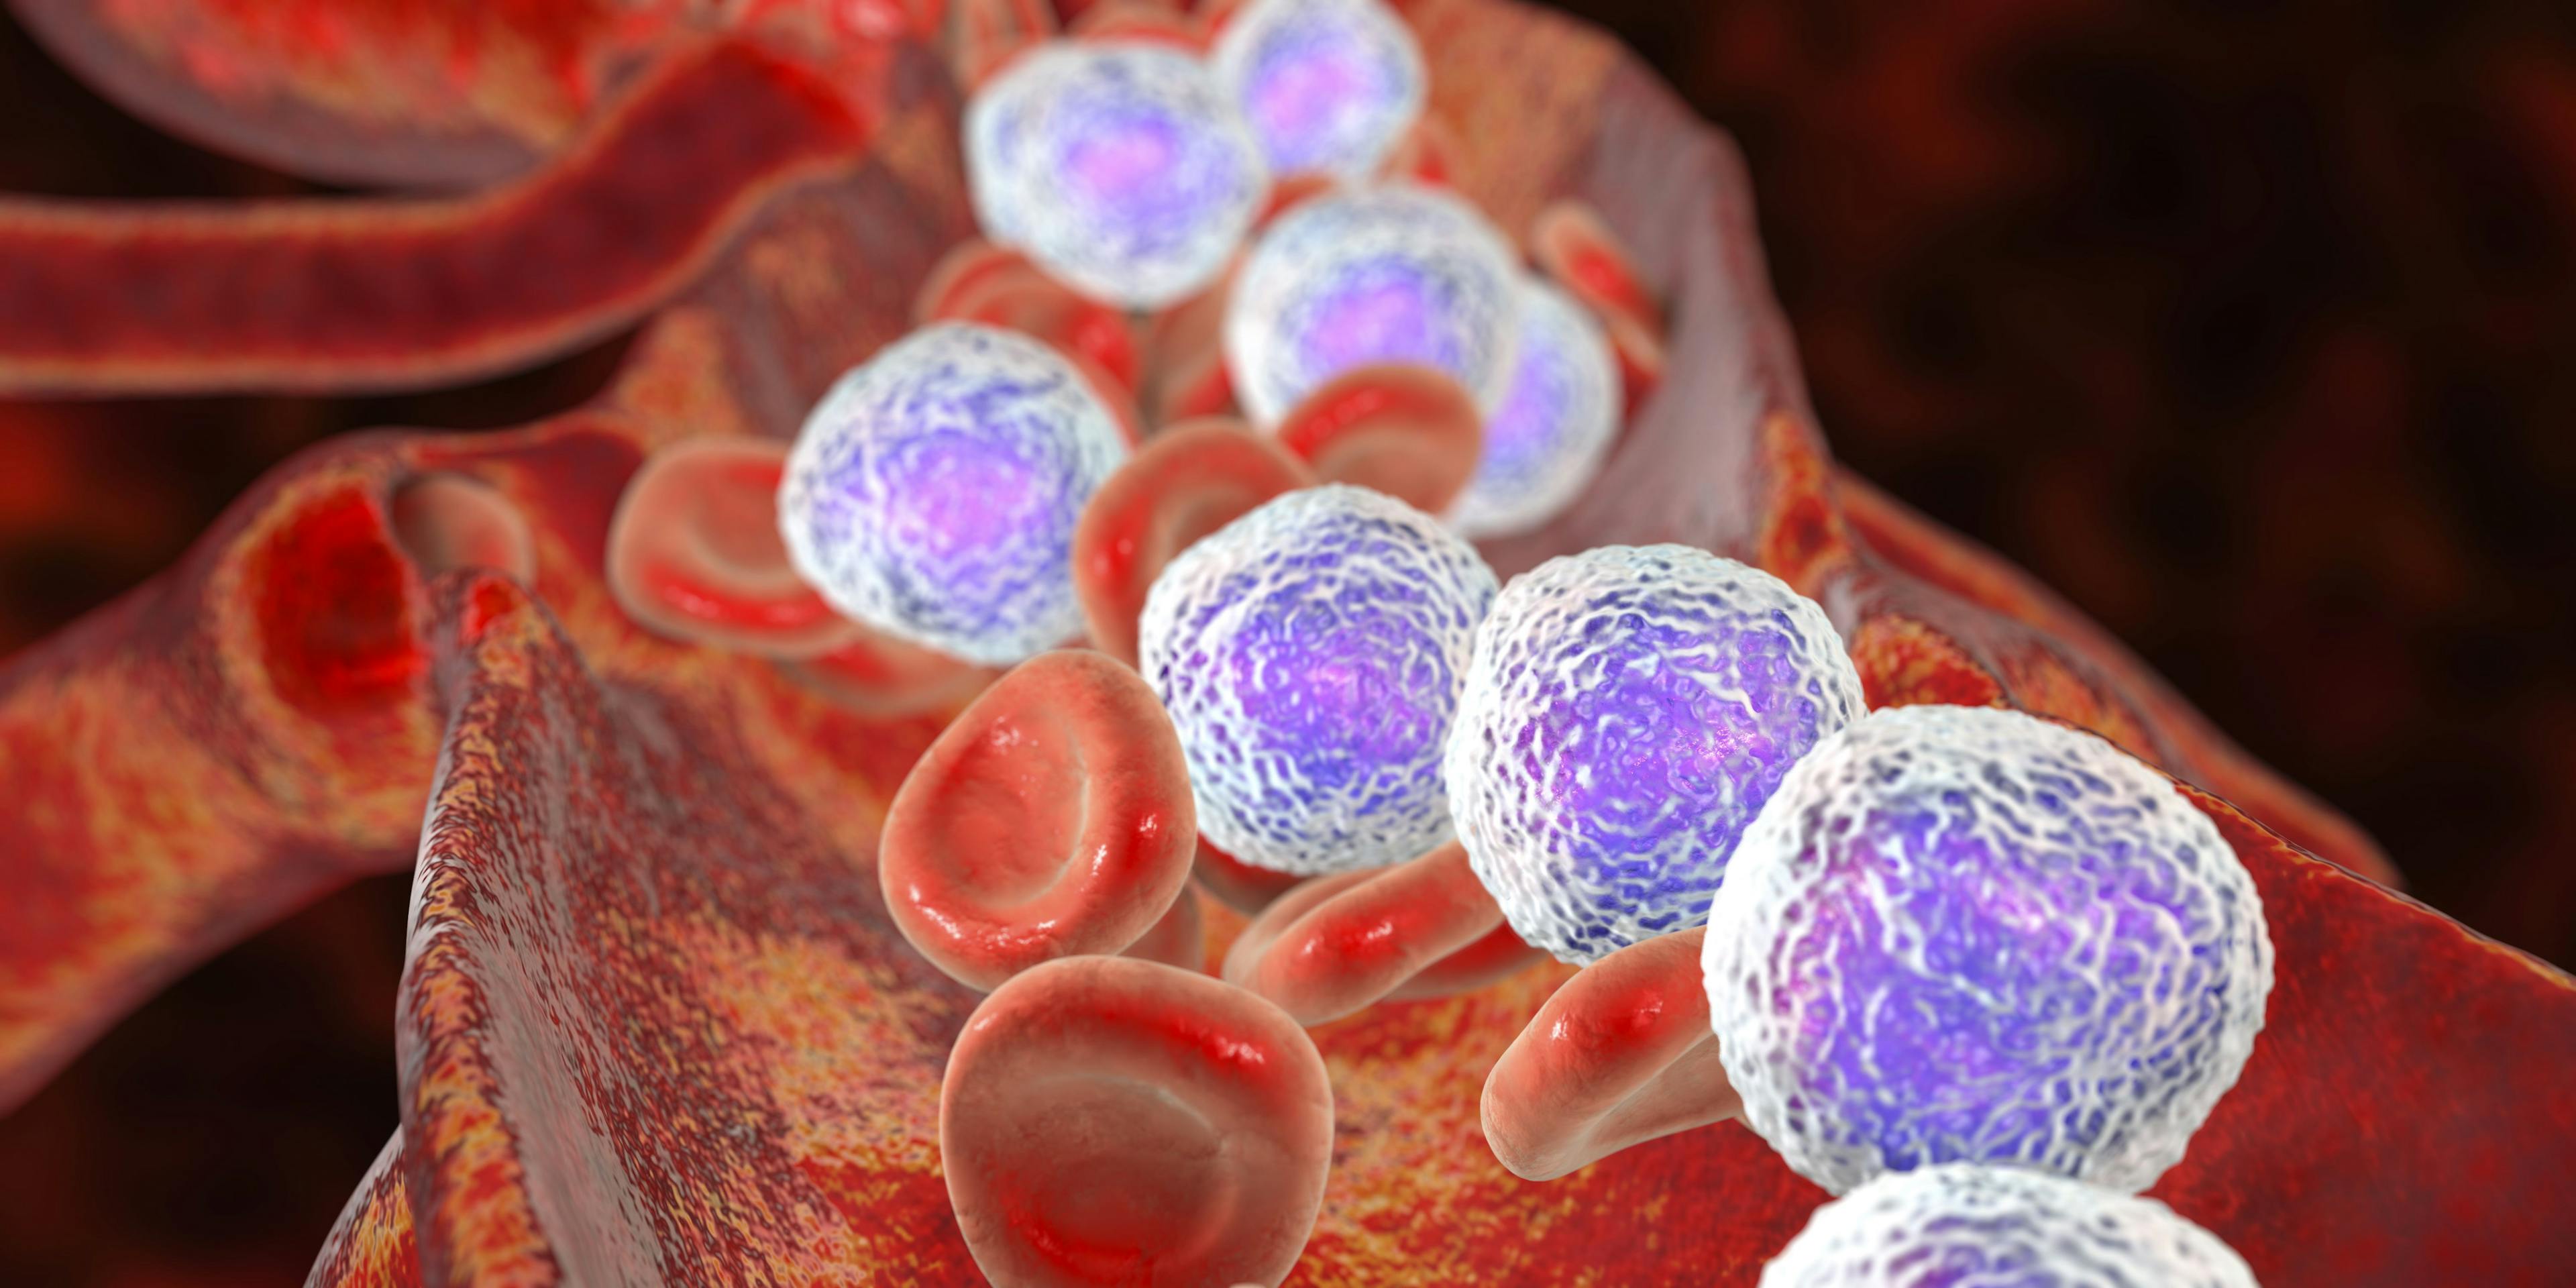 Patients with CD5-positive relapsed/refractory peripheral T-cell lymphoma may derive benefit from MT-101, which was granted fast track designation by the FDA.